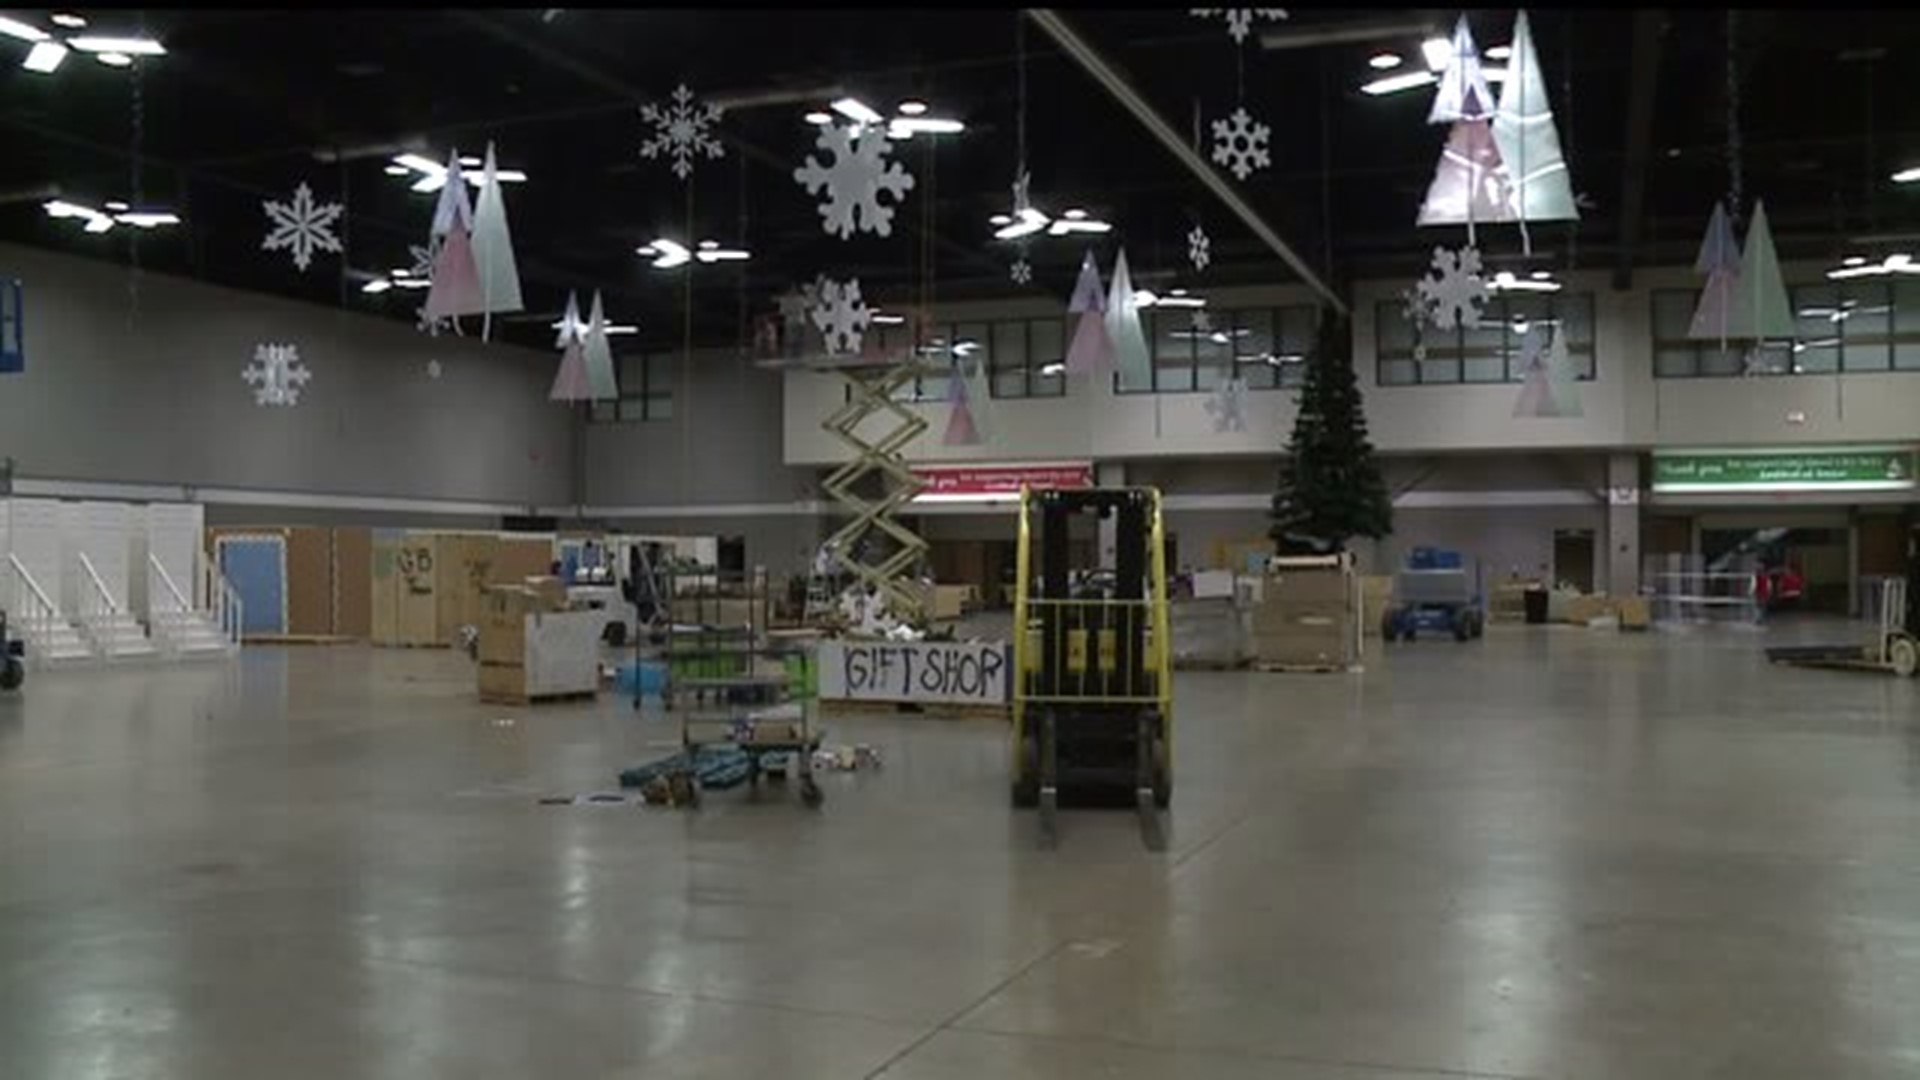 Set up underway for Festival of Trees